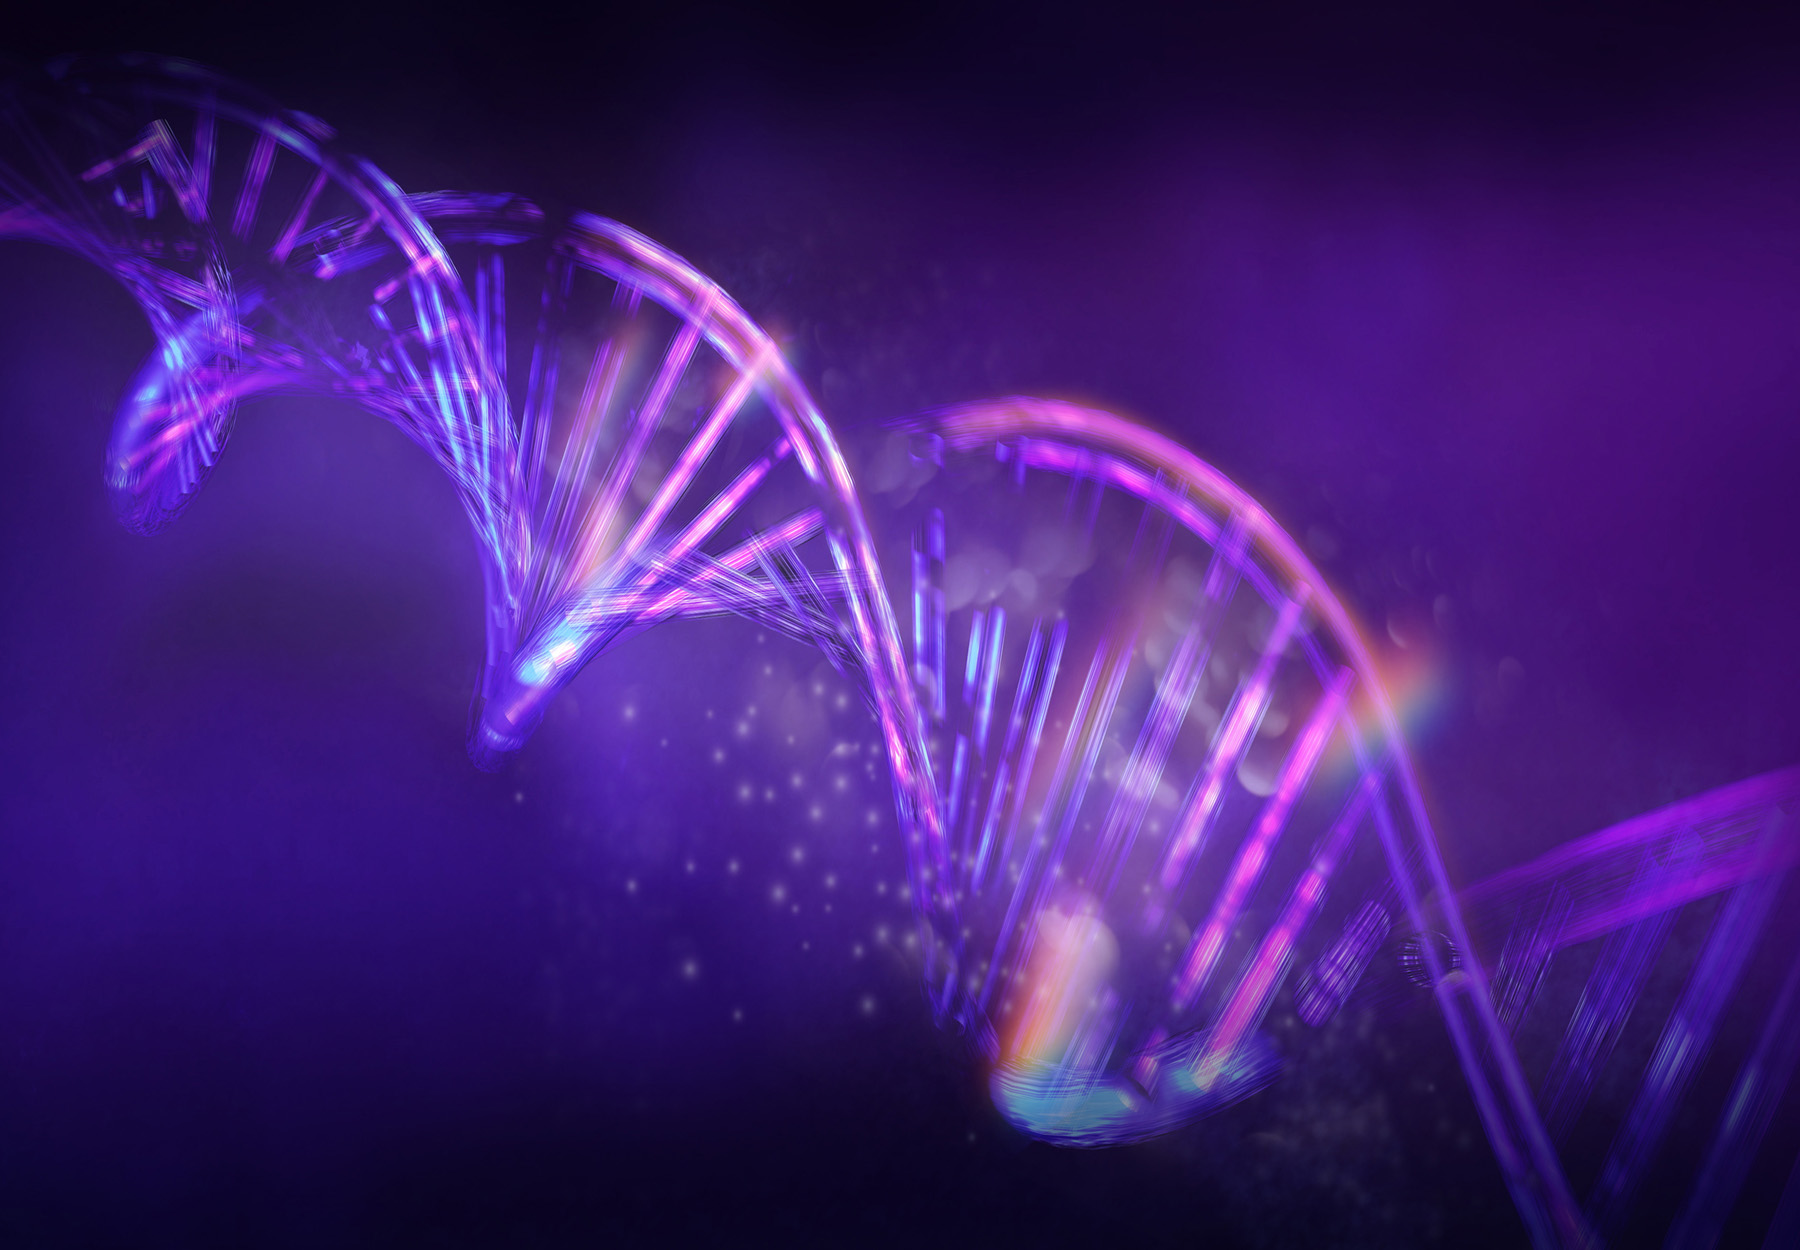 Diagonal model of abstract double helix DNA, glowing in virtual space. 3D render. Stock image.